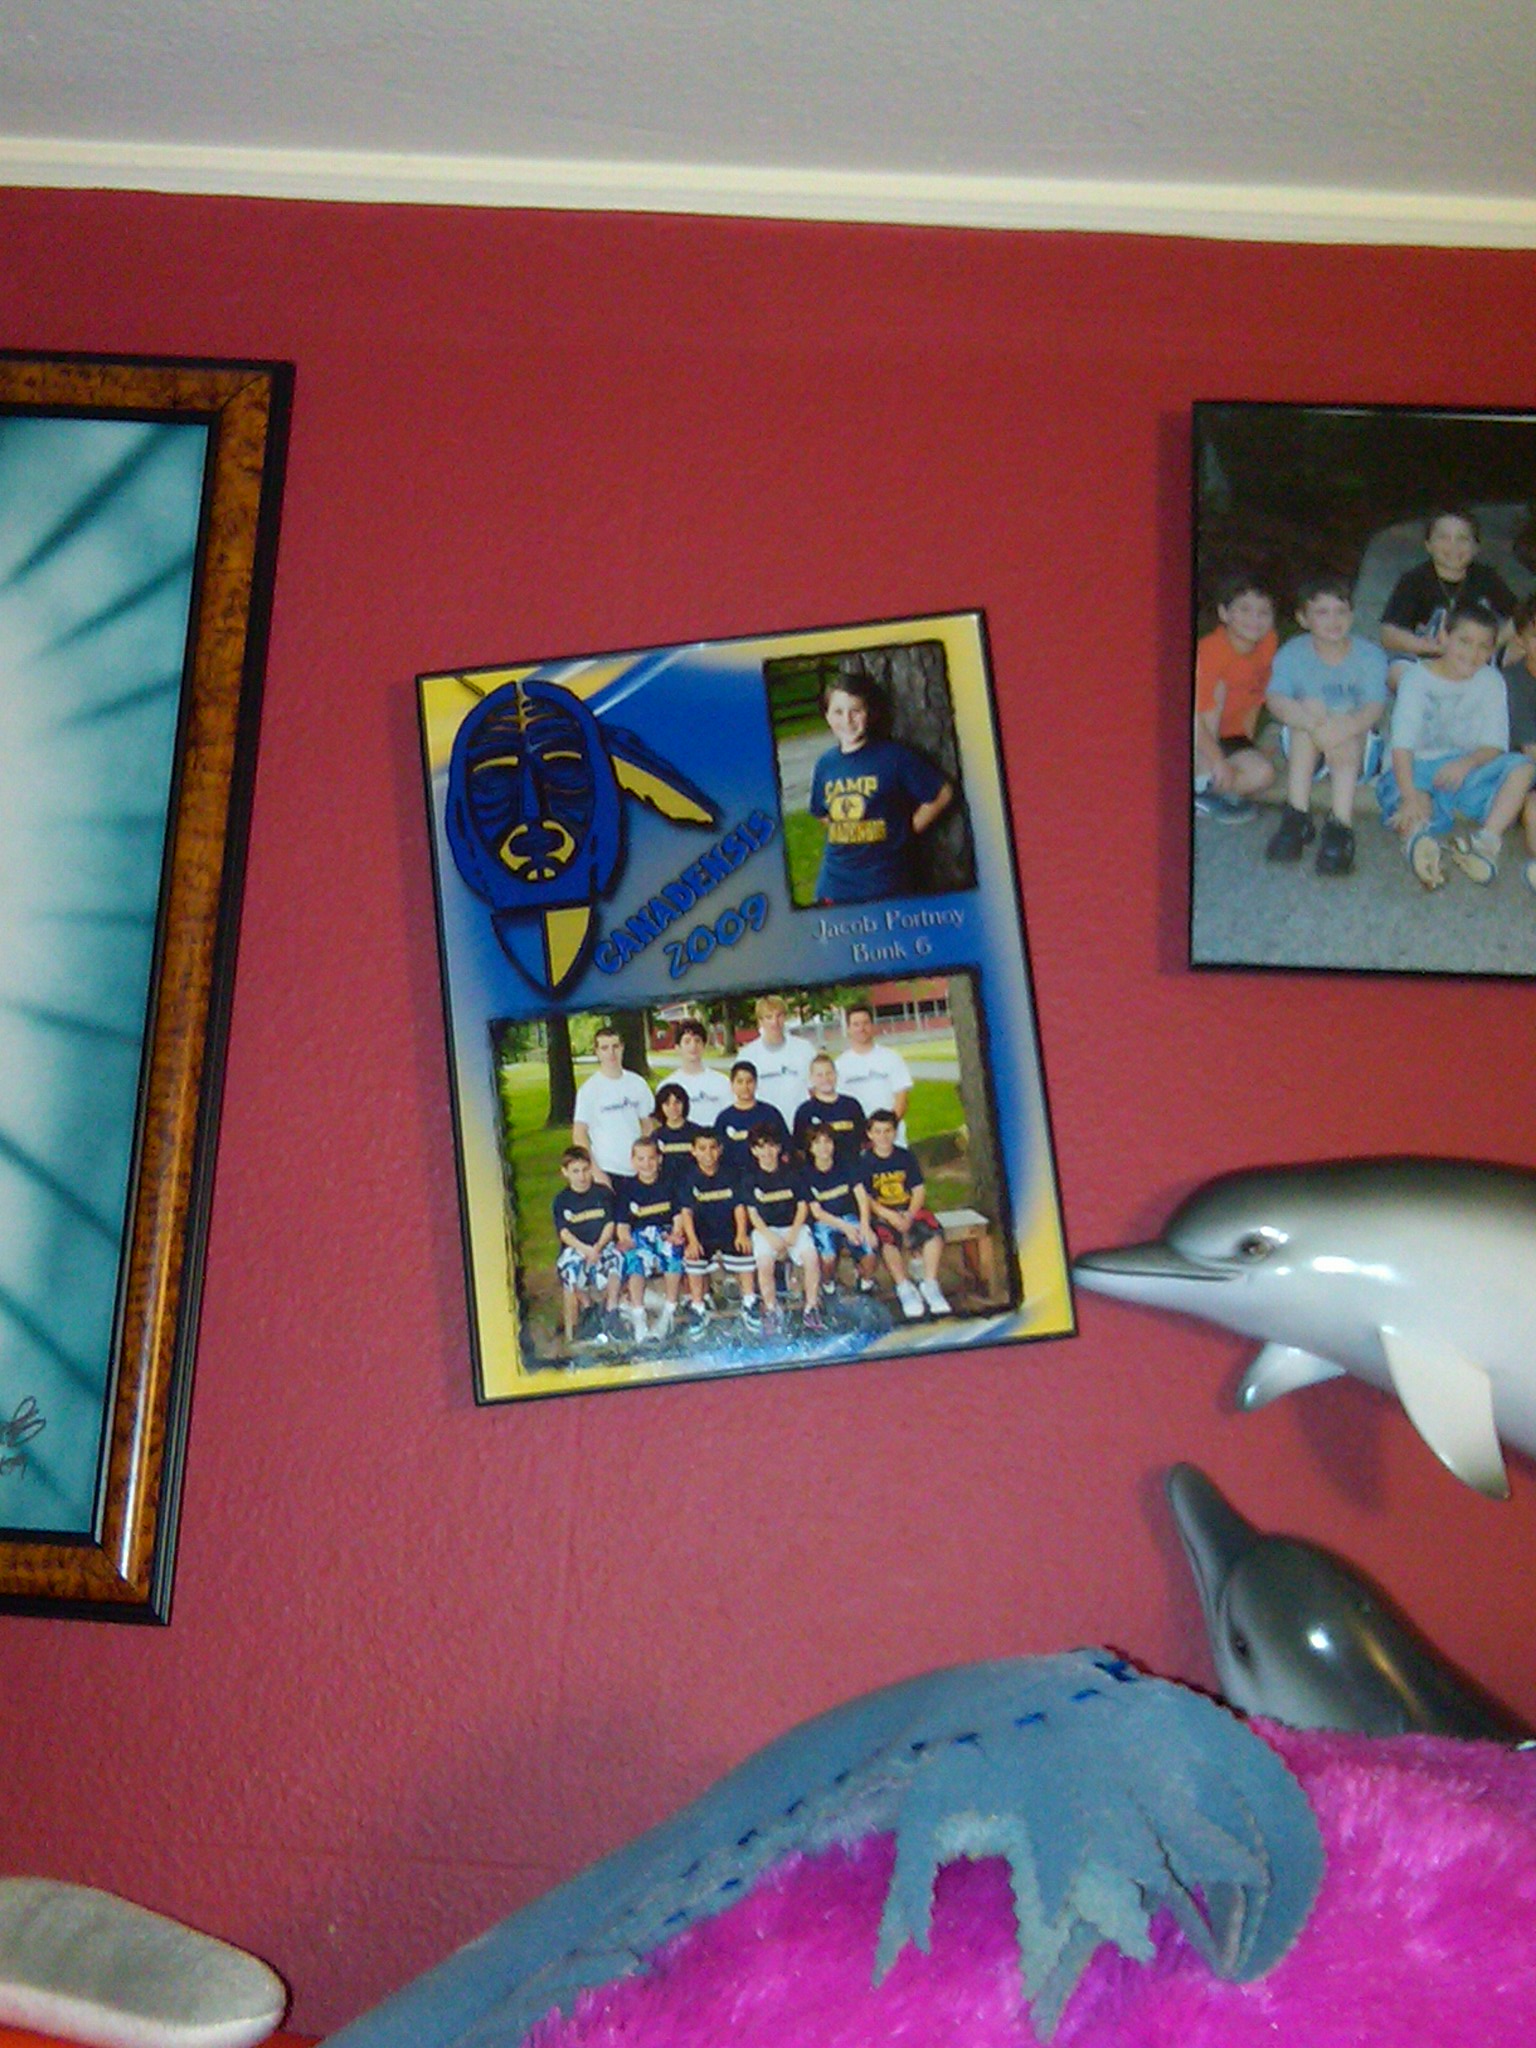 Jacob's bunk picture displayed prominently on his wall